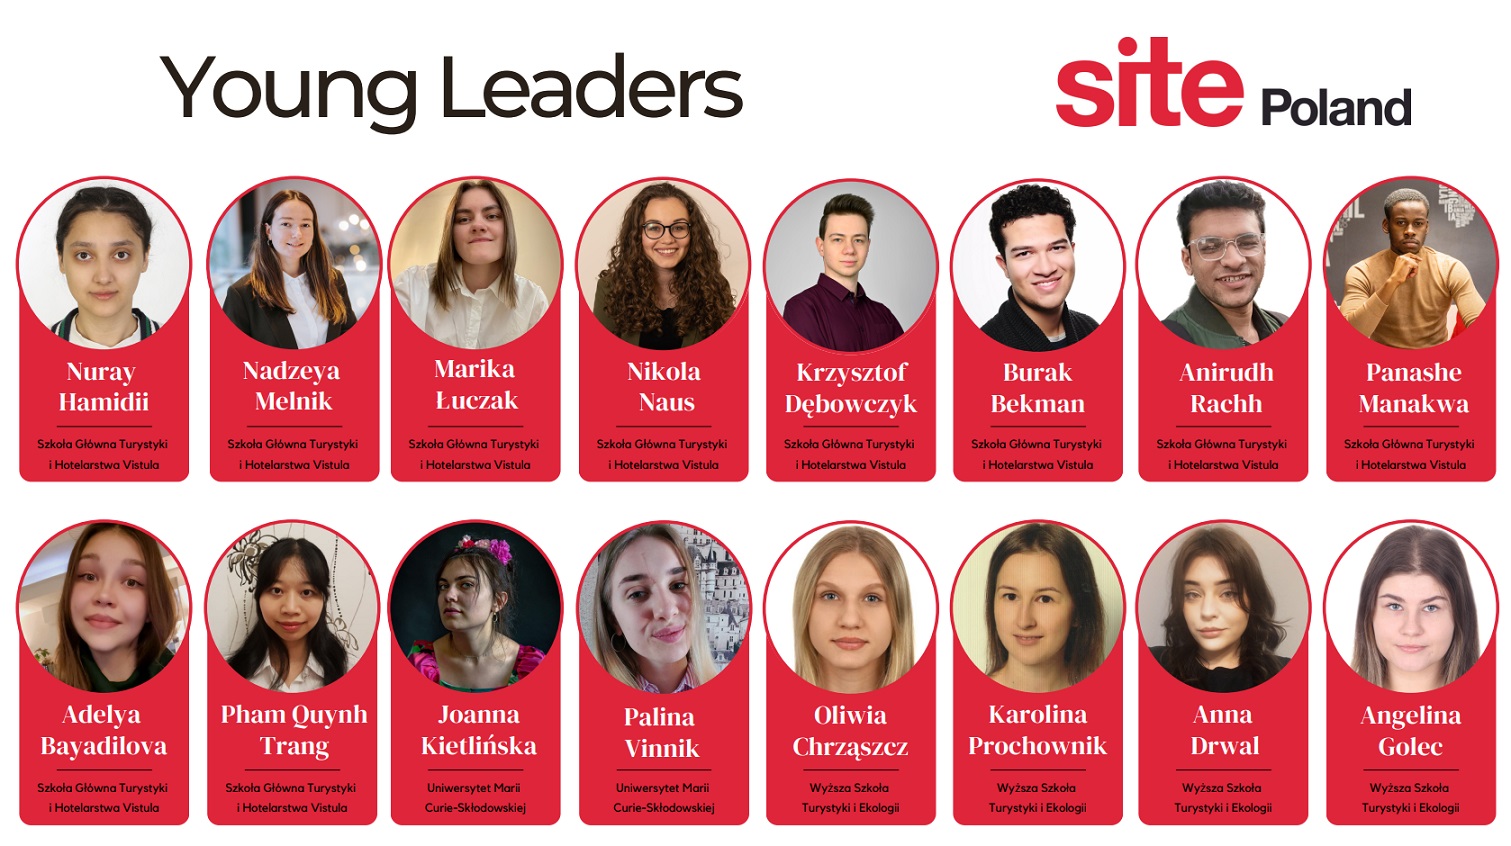 site-young-leaders-poland-mice.jpg